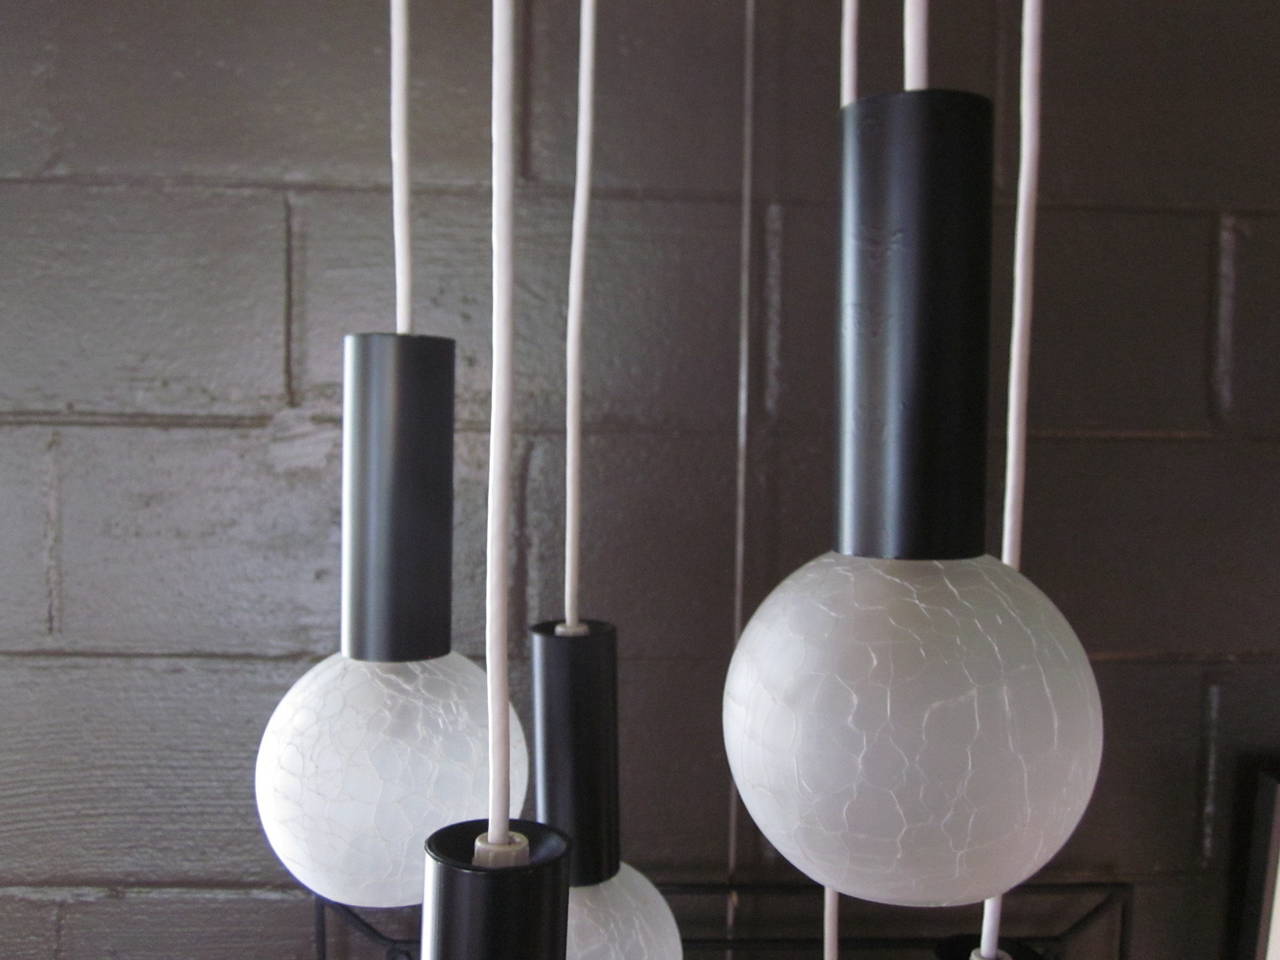 A Sciolari chandelier with six hanging lights, satin black steel shafts and round crackle glass balls, the mounting ceiling plate is a satin white metal with brass details. The length of each light can be slightly adjusted and modified with the cord